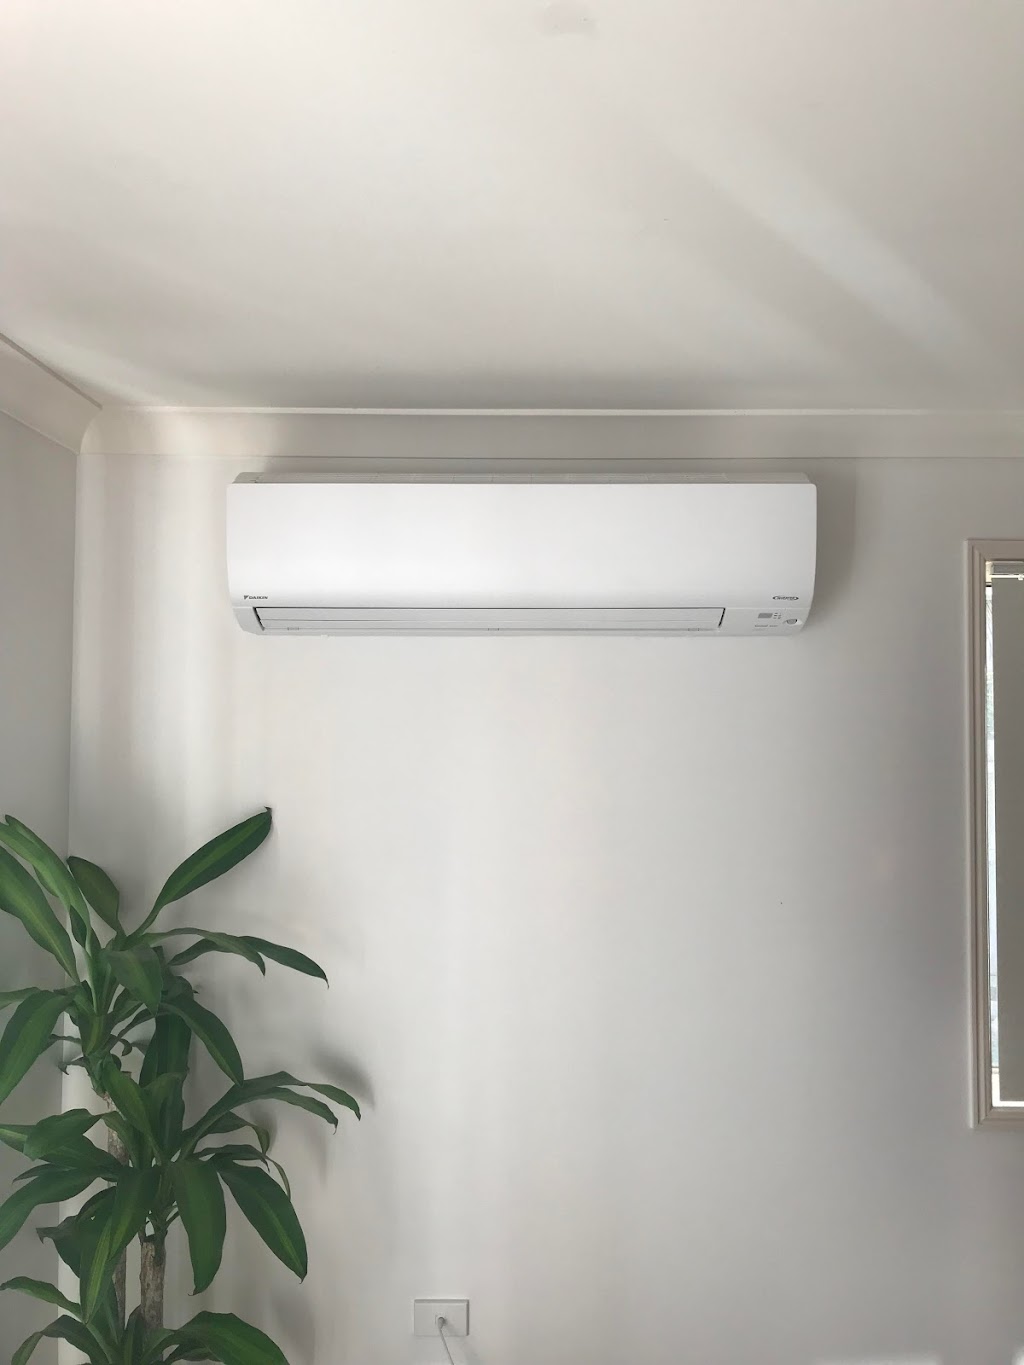 Domestic Air conditioning & Electrical Pty Ltd | general contractor | 26 College Cl, Upper Coomera QLD 4209, Australia | 0424505050 OR +61 424 505 050